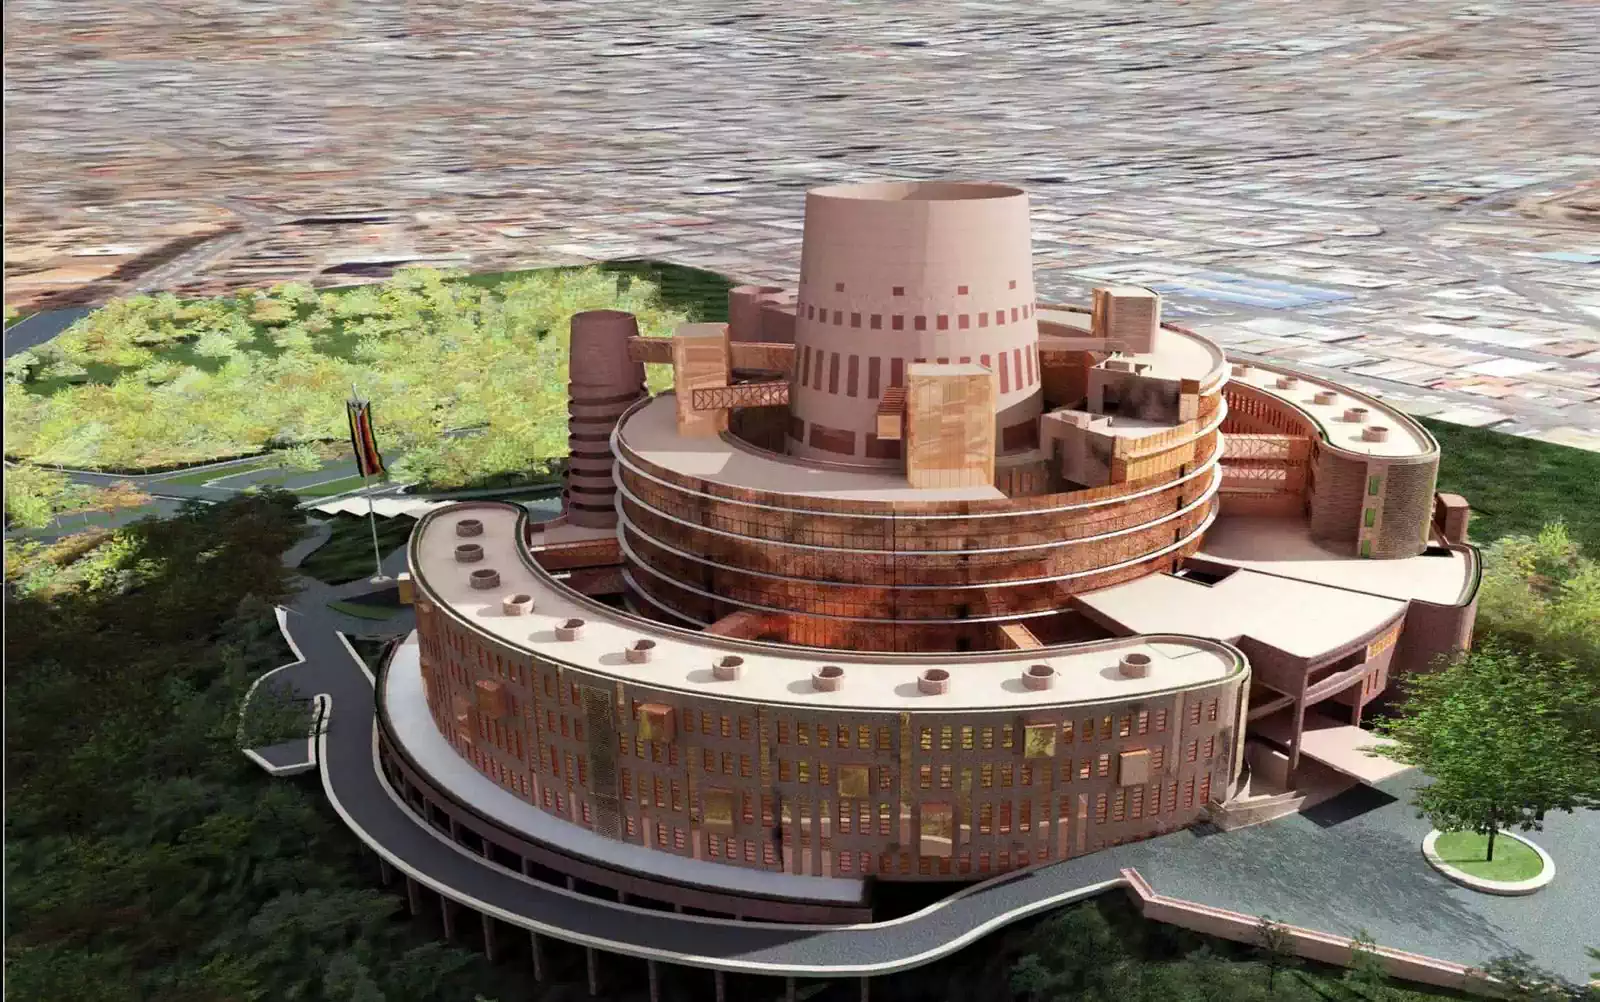 Aerial view of new parliament design by pantic architects with conical forms inspired by Great Zimbabwe ruins